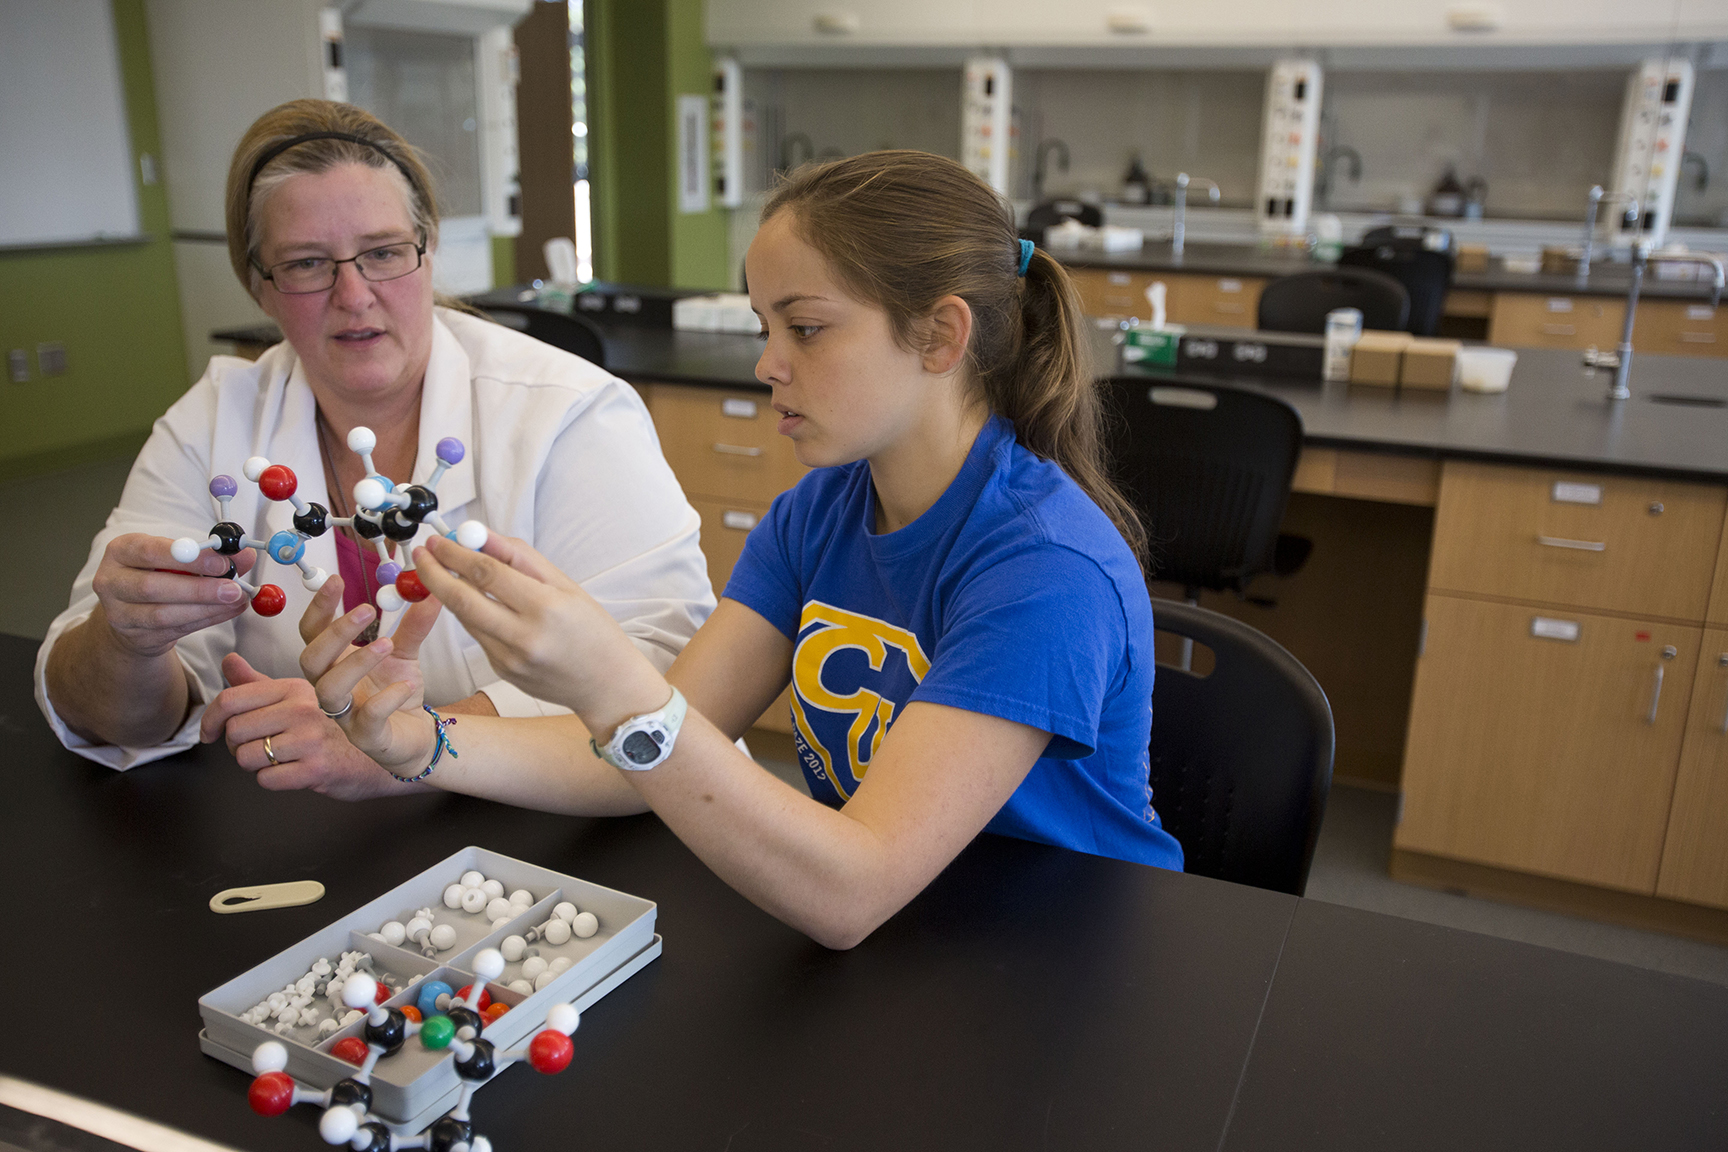 Clarke University Chemistry Degree students in class getting hands-on learning